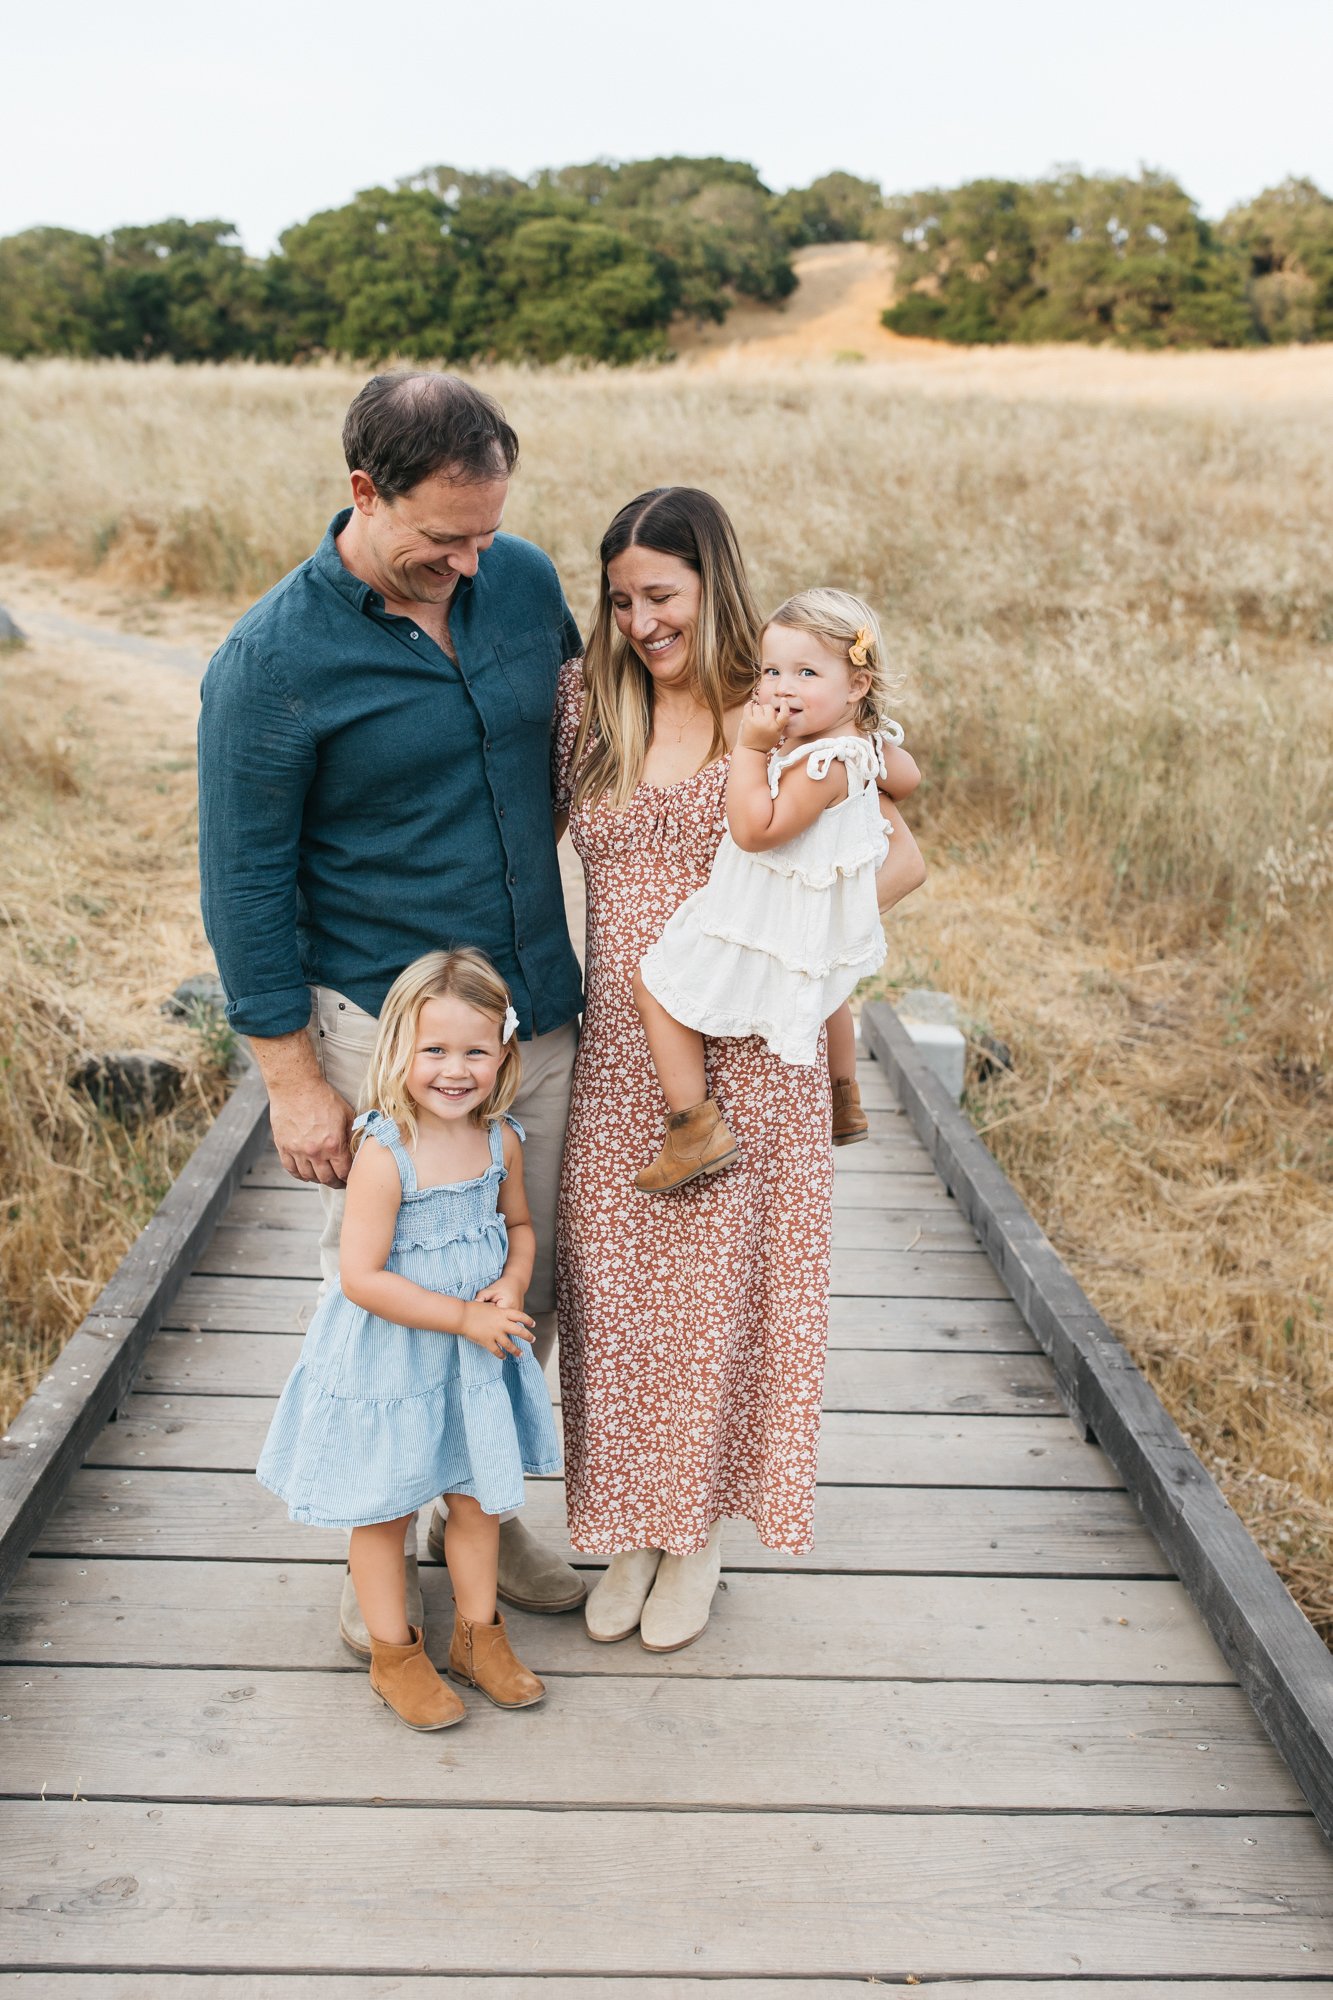 outdoor family outfit photo ideas from san francisco family photographer and marin family photographer Cristin More_5.jpg